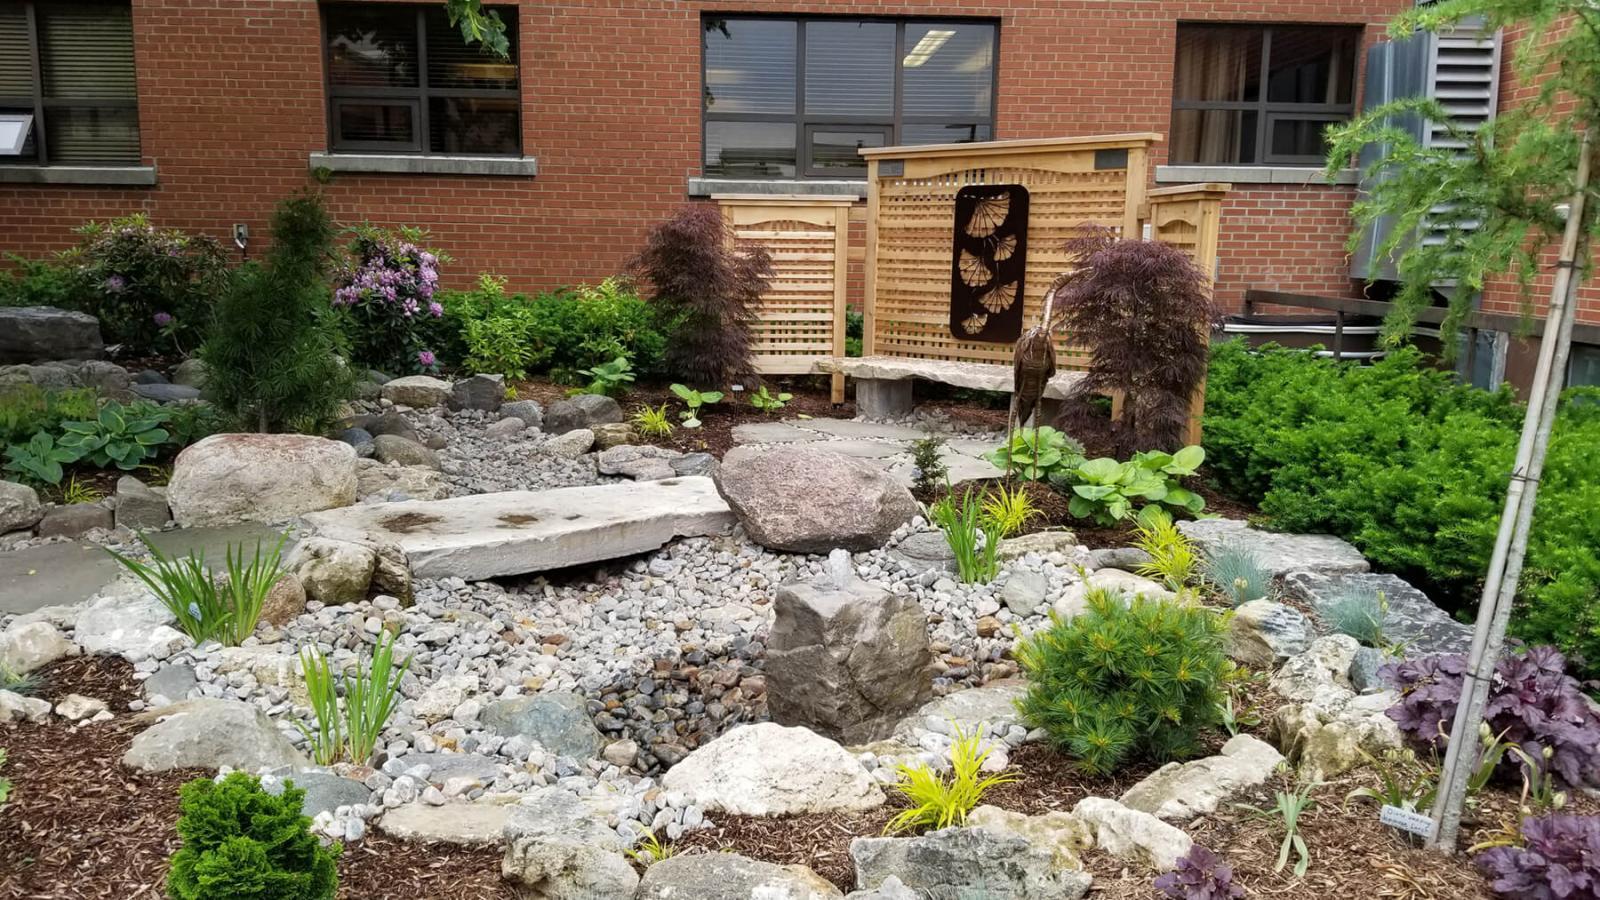 Serenity garden opens for patients and staff